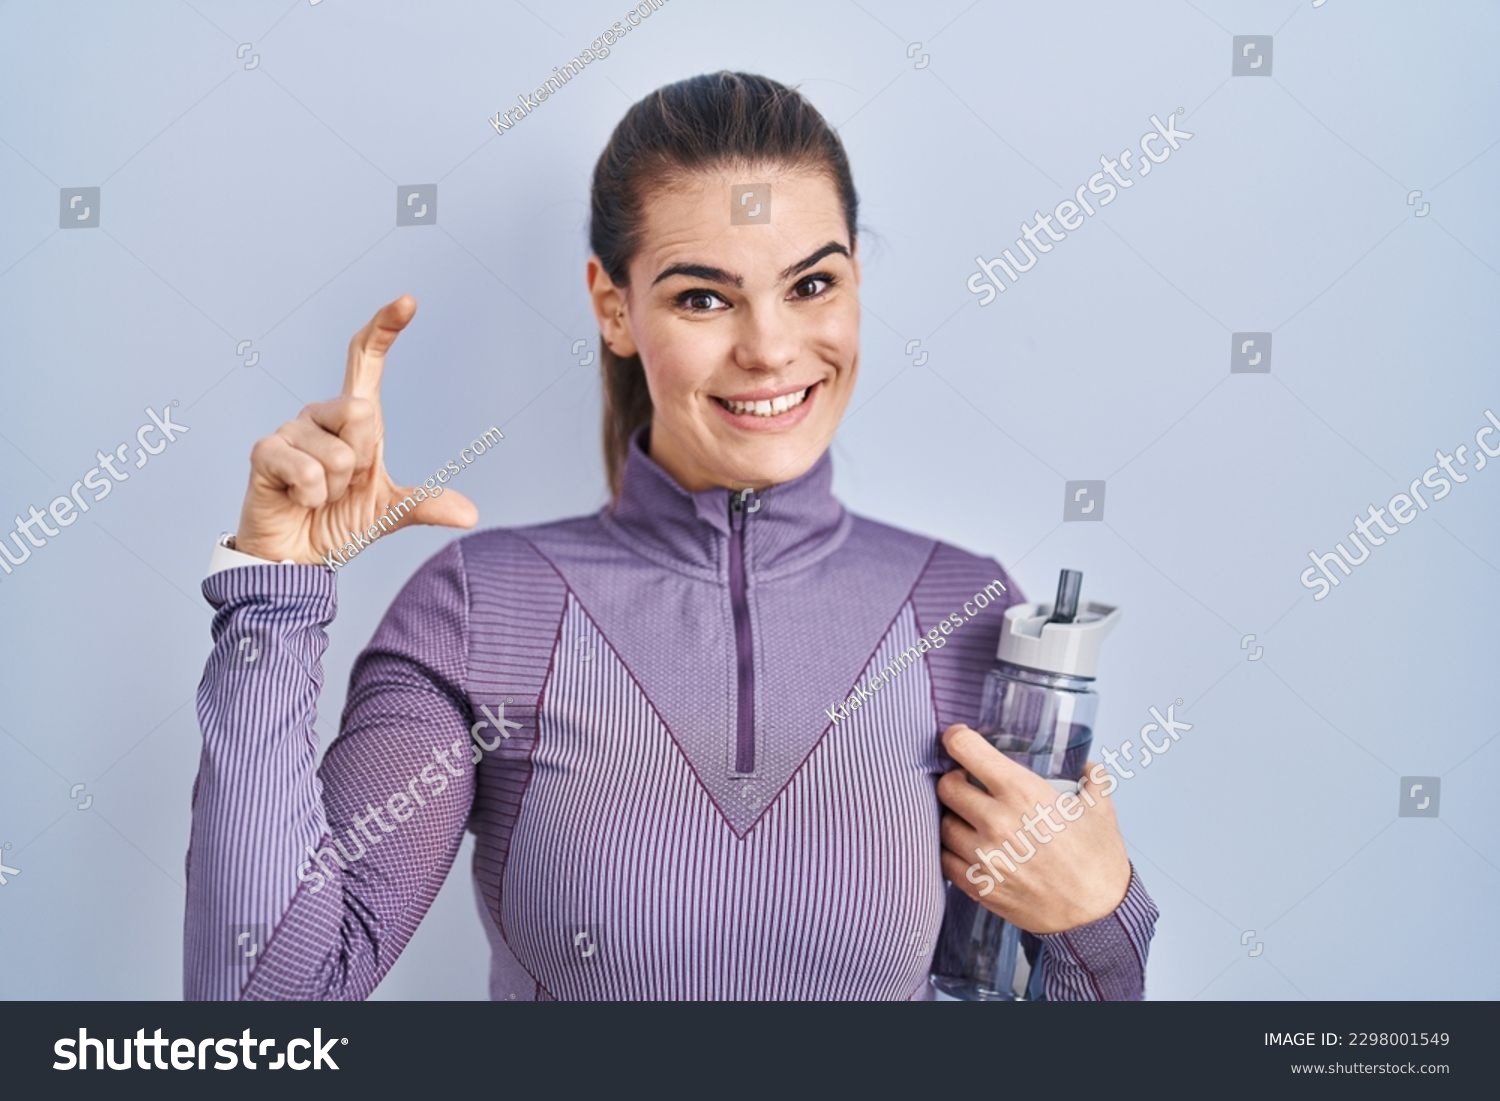 Beautiful woman wearing sportswear holding water bottle smiling and confident gesturing with hand doing small size sign with fingers looking and the camera. measure concept.  #2298001549